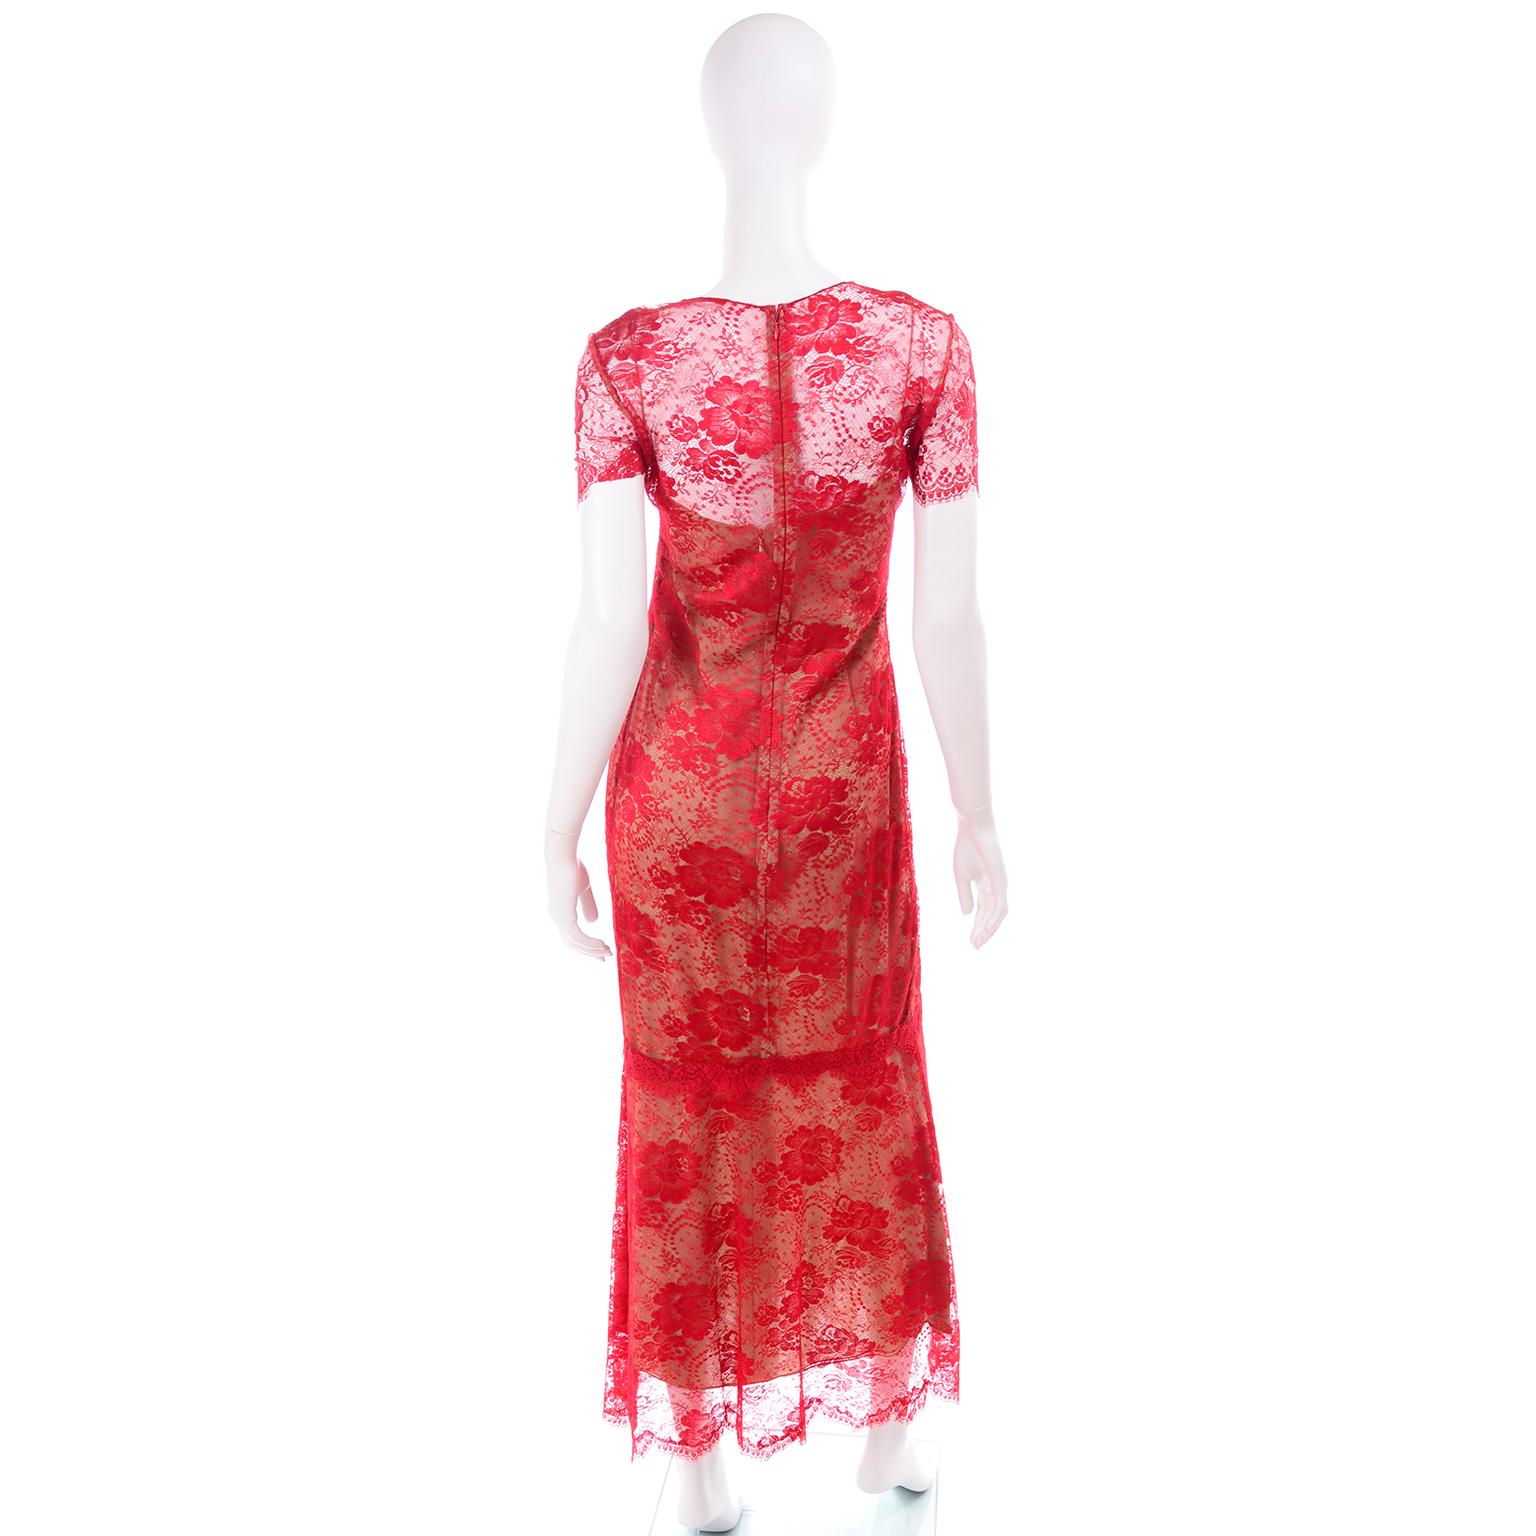 Bill Blass Red Lace Vintage Long Evening Runway Dress Spring Summer 1997 In Excellent Condition For Sale In Portland, OR